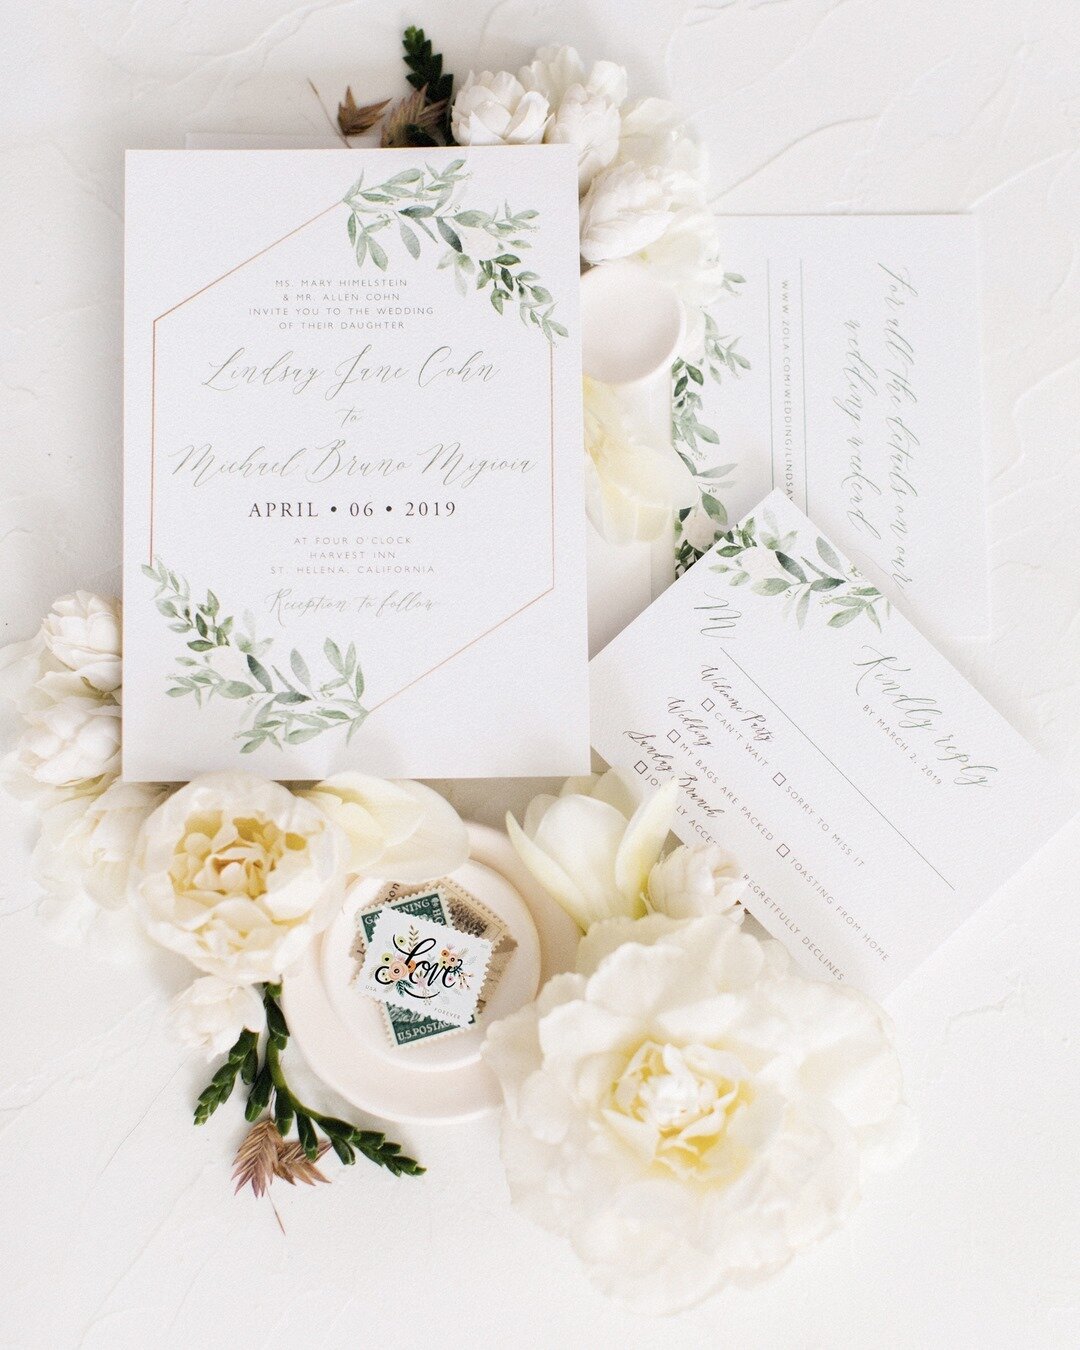 Watercolor is so versatile. It can be used in a traditional wedding crest or in big splashes of bright colors. For this suite, it meant delicate greenery + white florals with that geometric boho touch. 🌿⠀⠀⠀⠀⠀⠀⠀⠀⠀
photo: @brittrenephoto